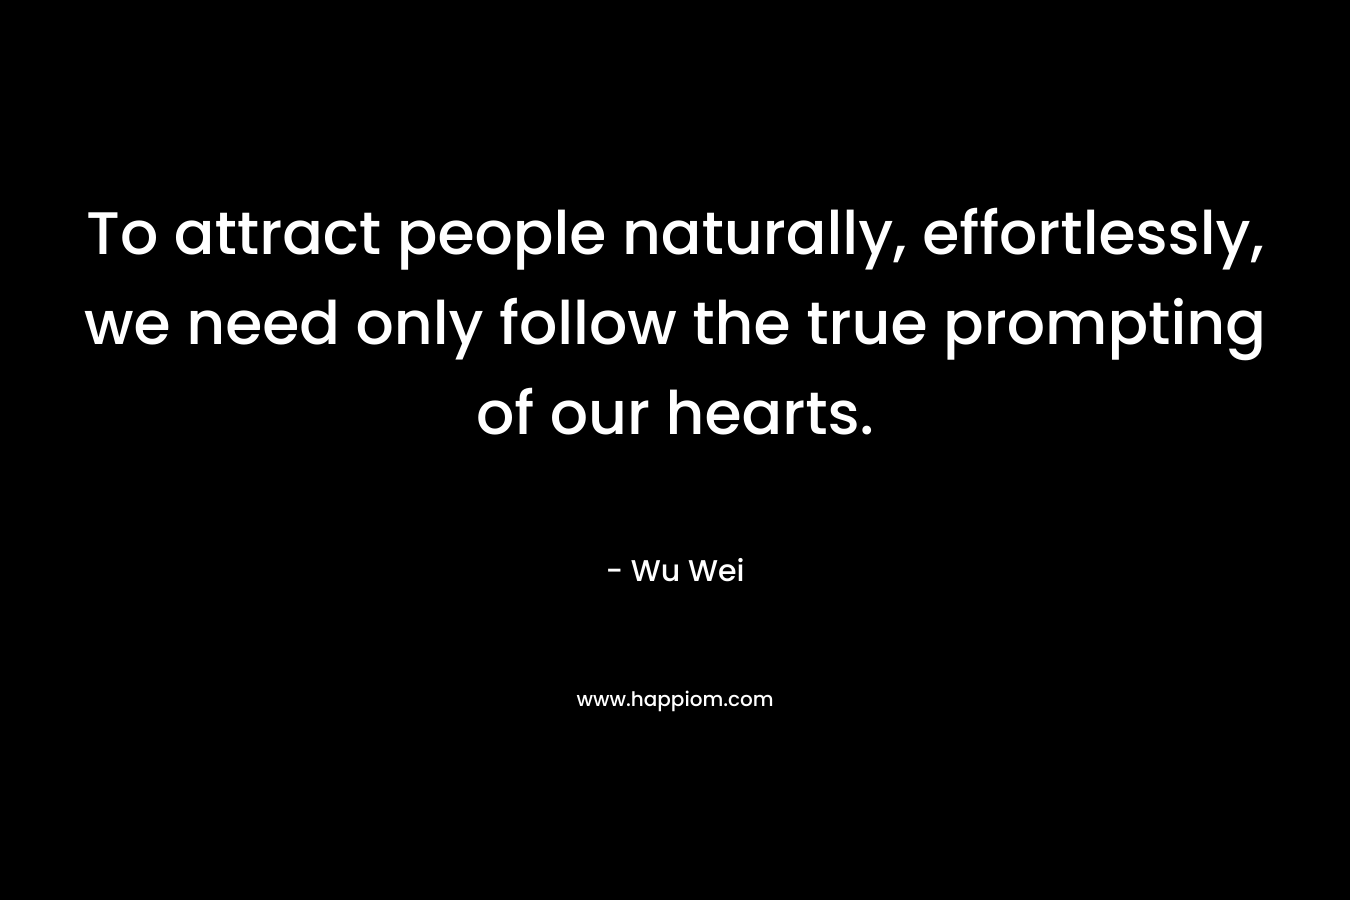 To attract people naturally, effortlessly, we need only follow the true prompting of our hearts.